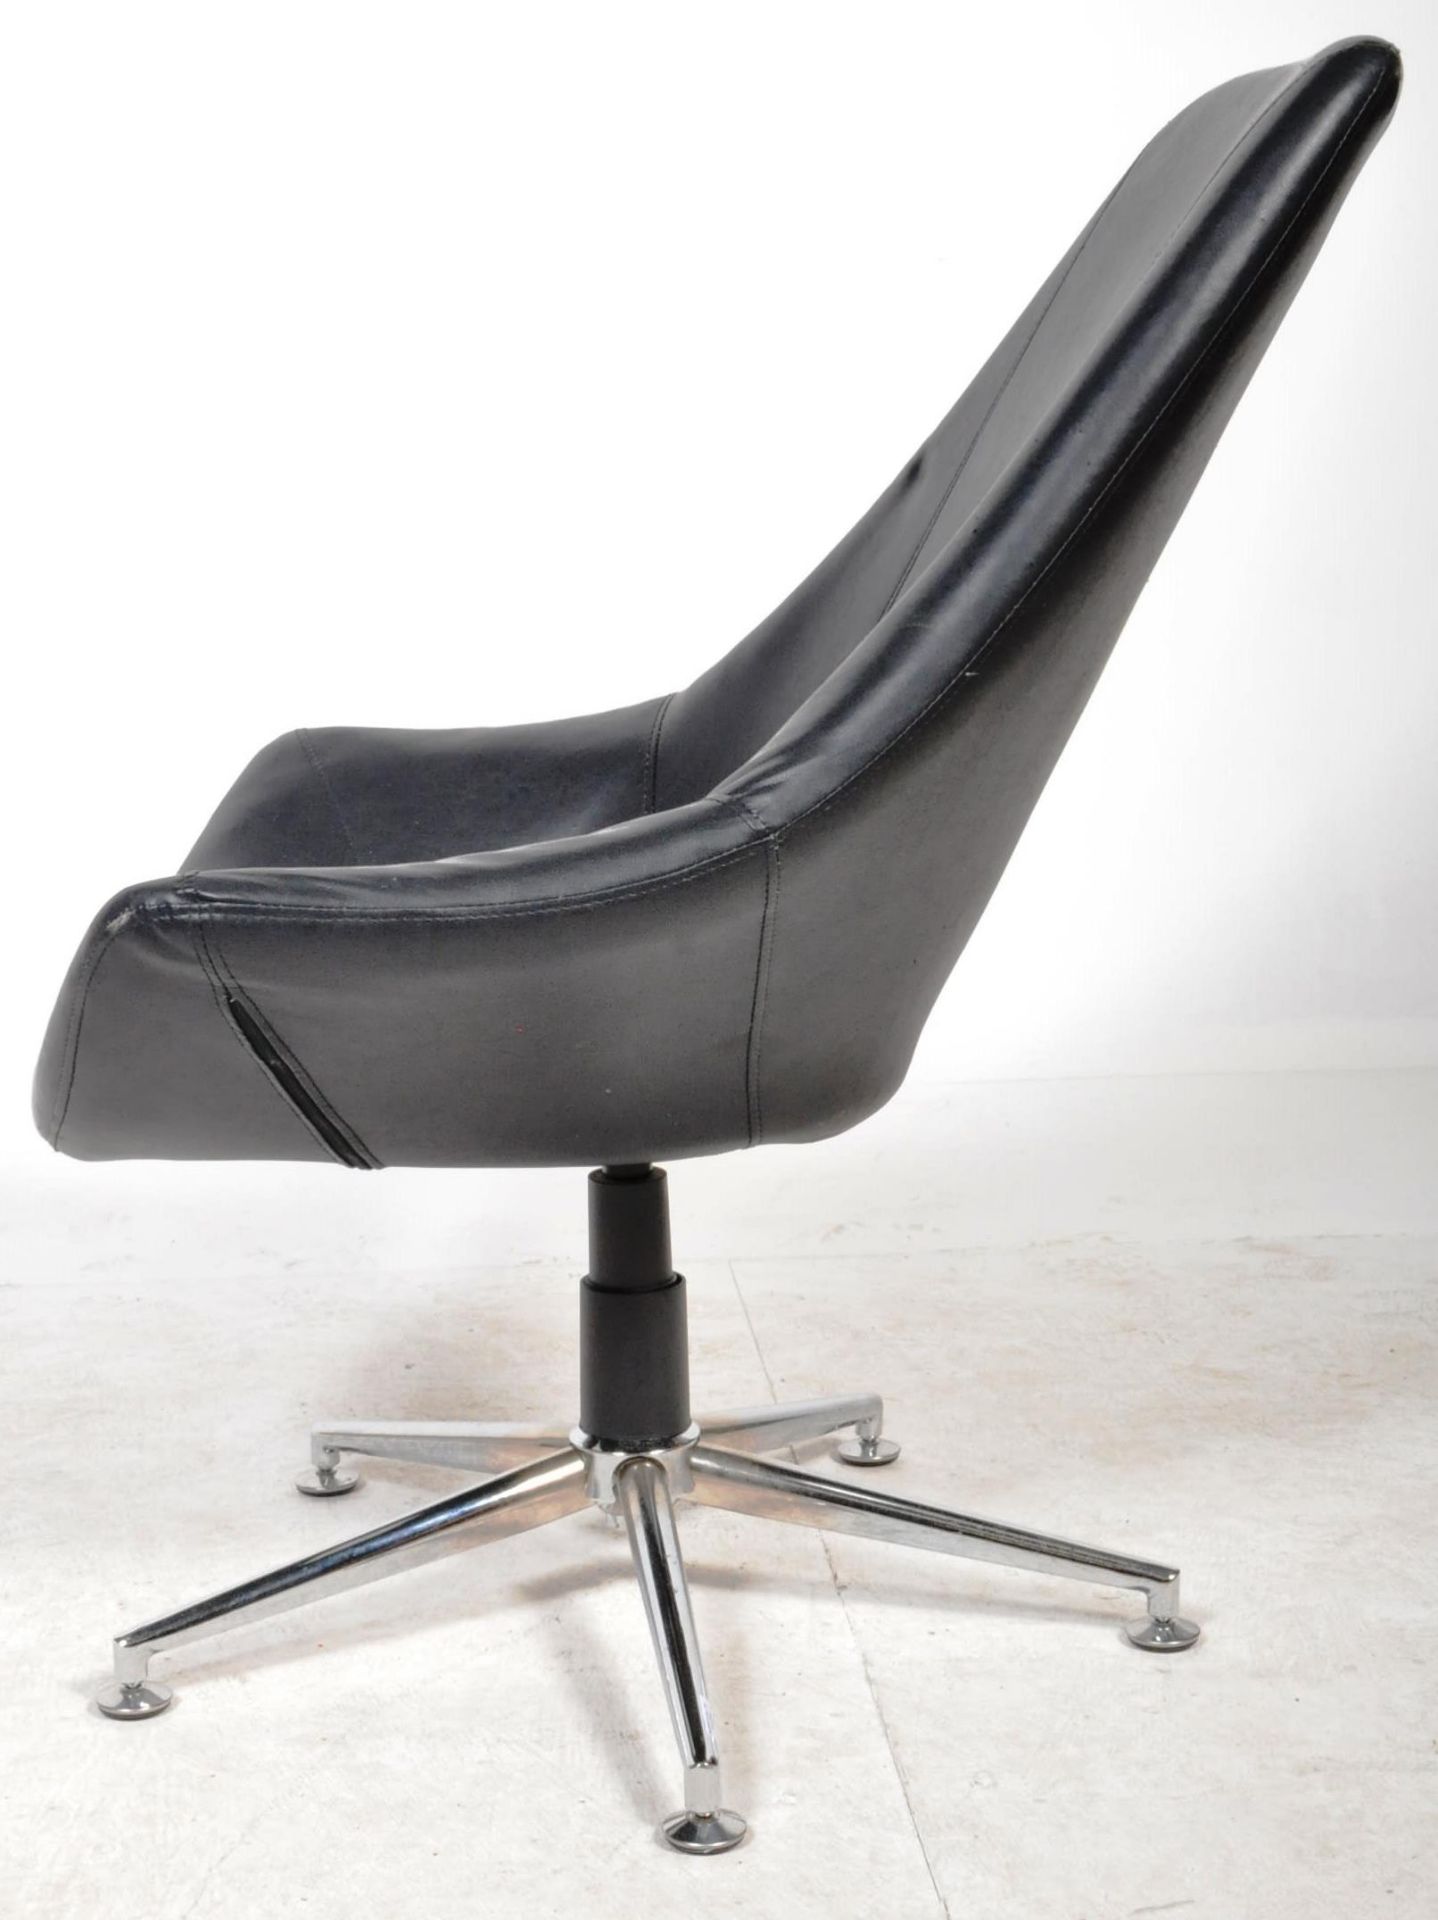 RETRO 1970'S BLACK LEATHER EGG CHAIR RAISED ON A CHROME BASE - Image 5 of 6